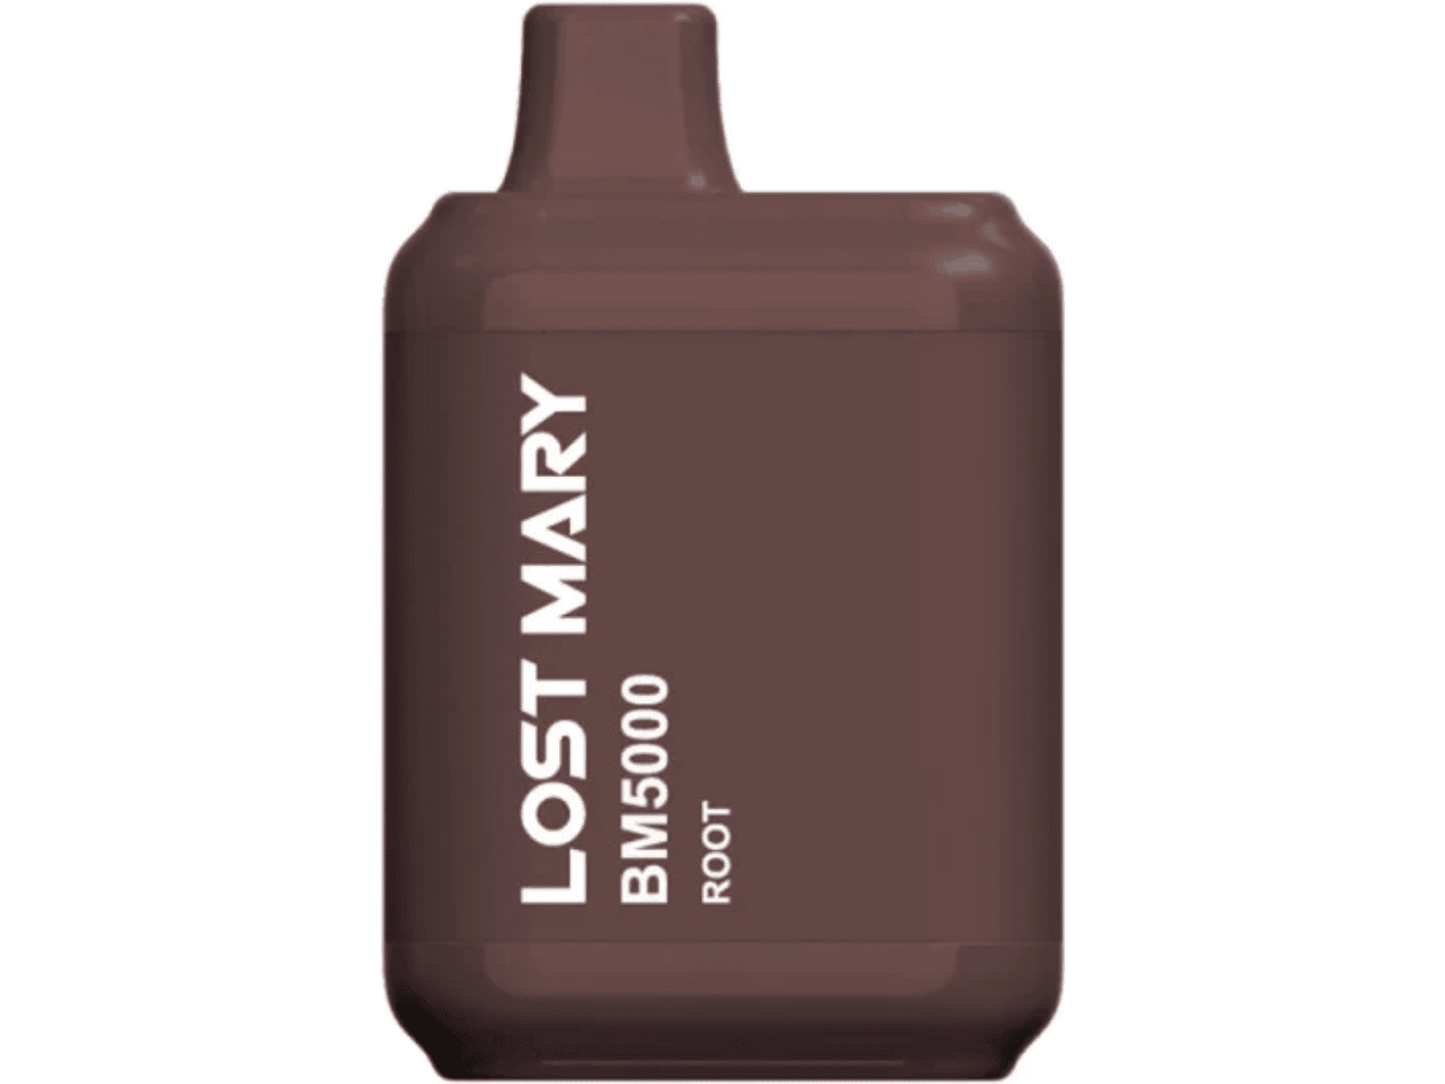 Lost Mary BM5000 Root flavored disposable vape device.